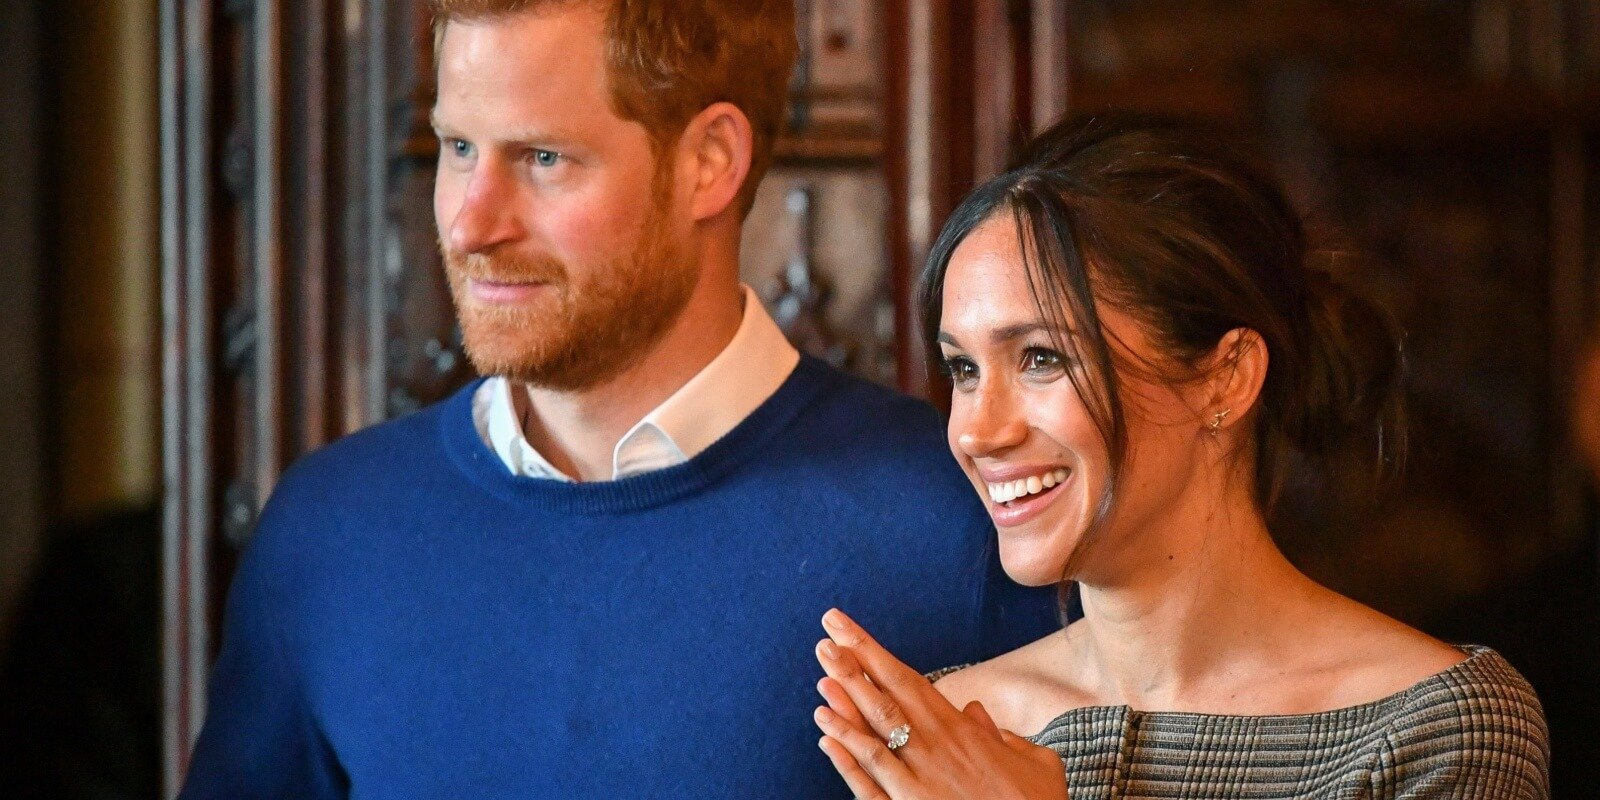 Prince Harry and Meghan Markle are photographed as they watch a performance by a Welsh choir in the banqueting hall during a visit to Cardiff Castle on January 18, 2018 in Cardiff, Wales.